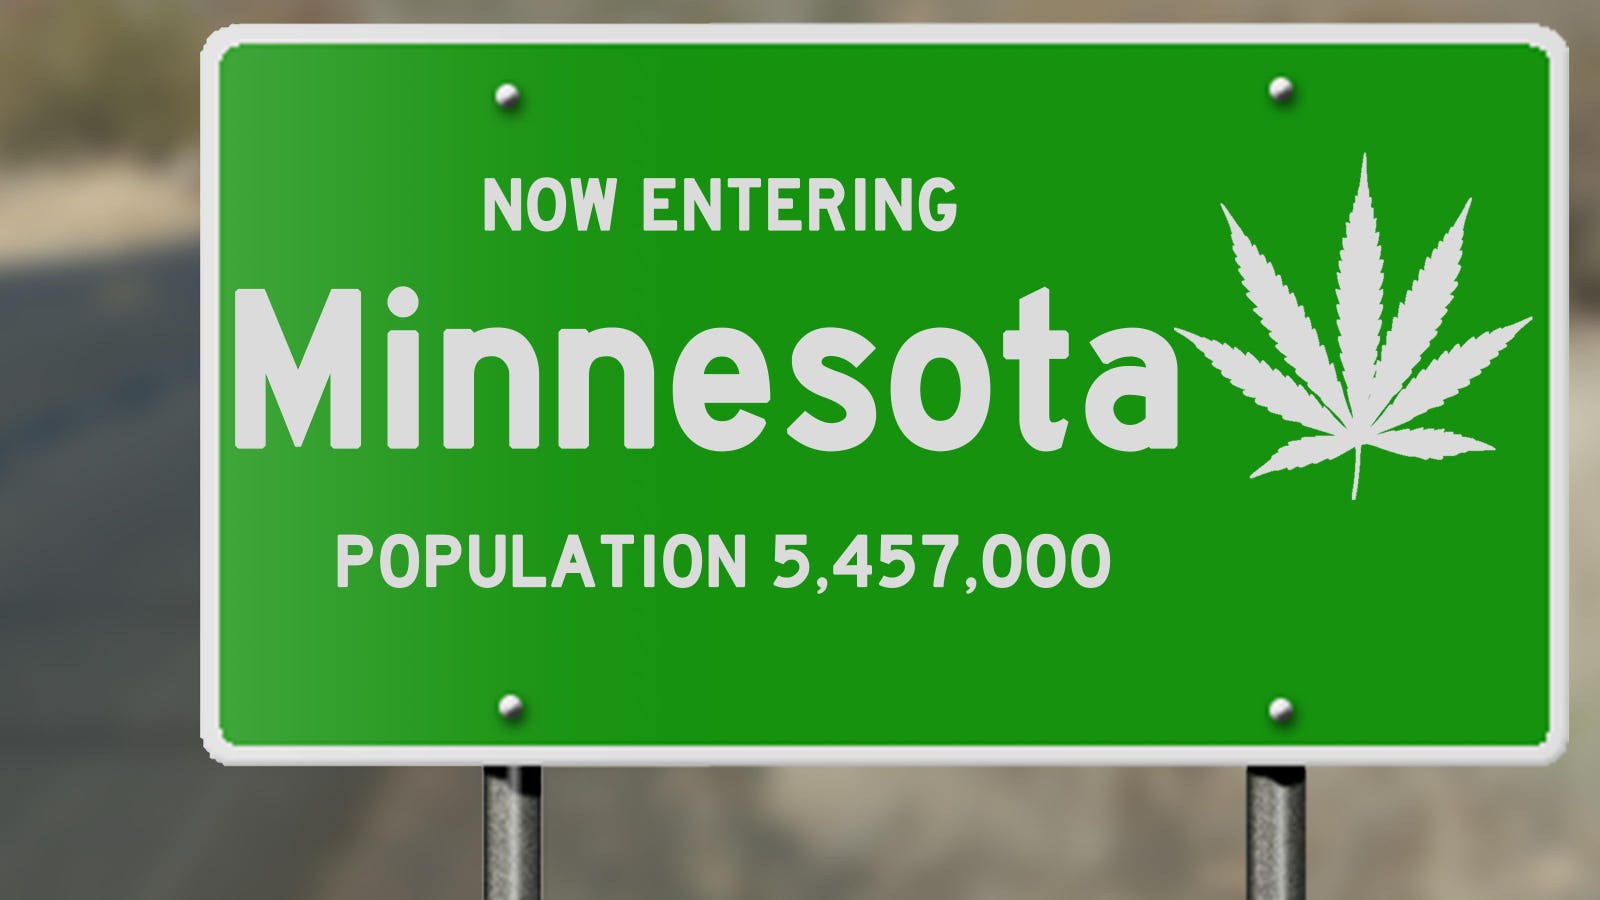 Minnesota Laws Bans Searches Based Solely On Marijuana Odor